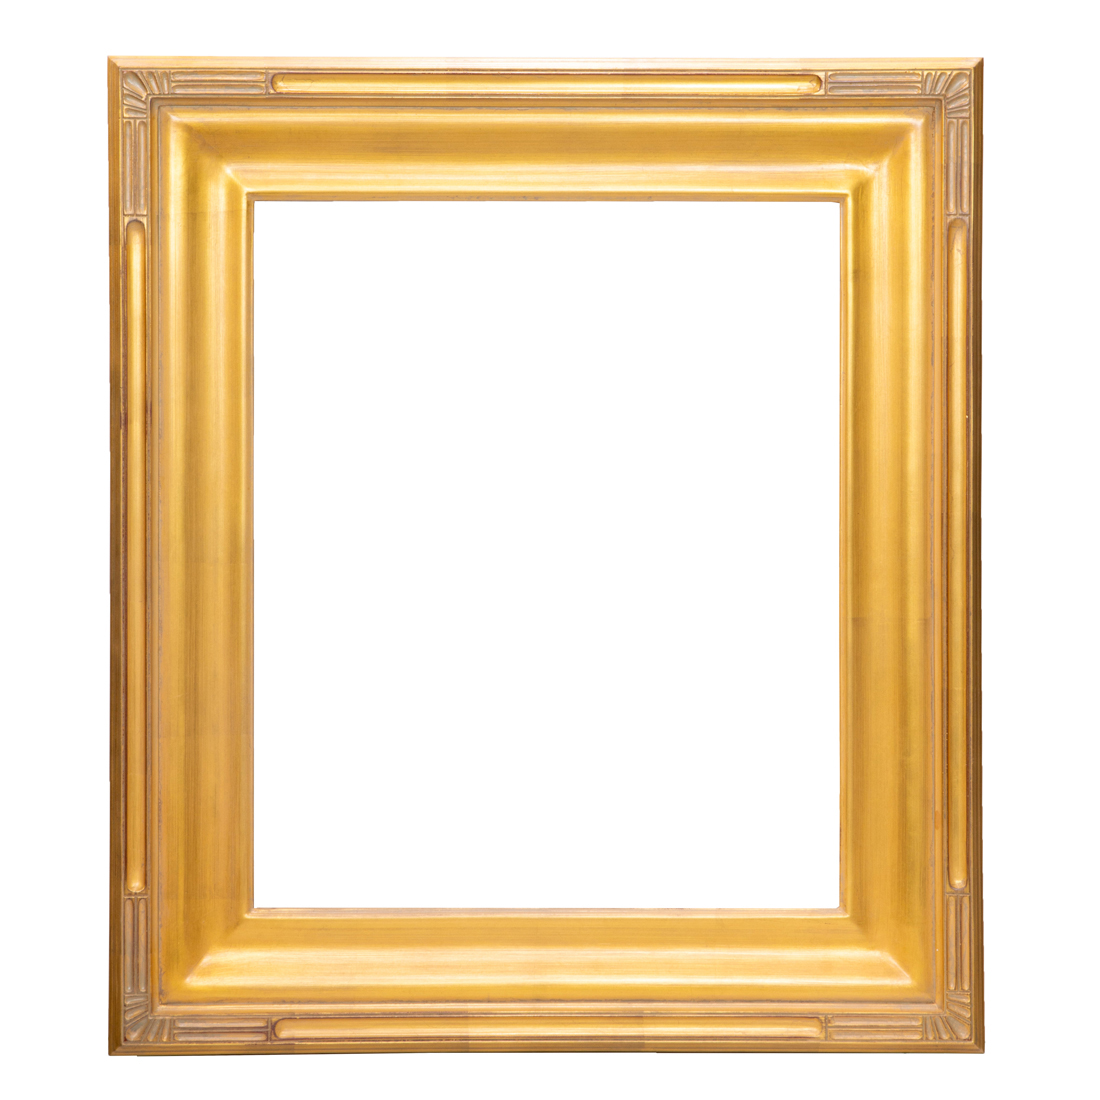 AN ARTS & CRAFTS PICTURE FRAME